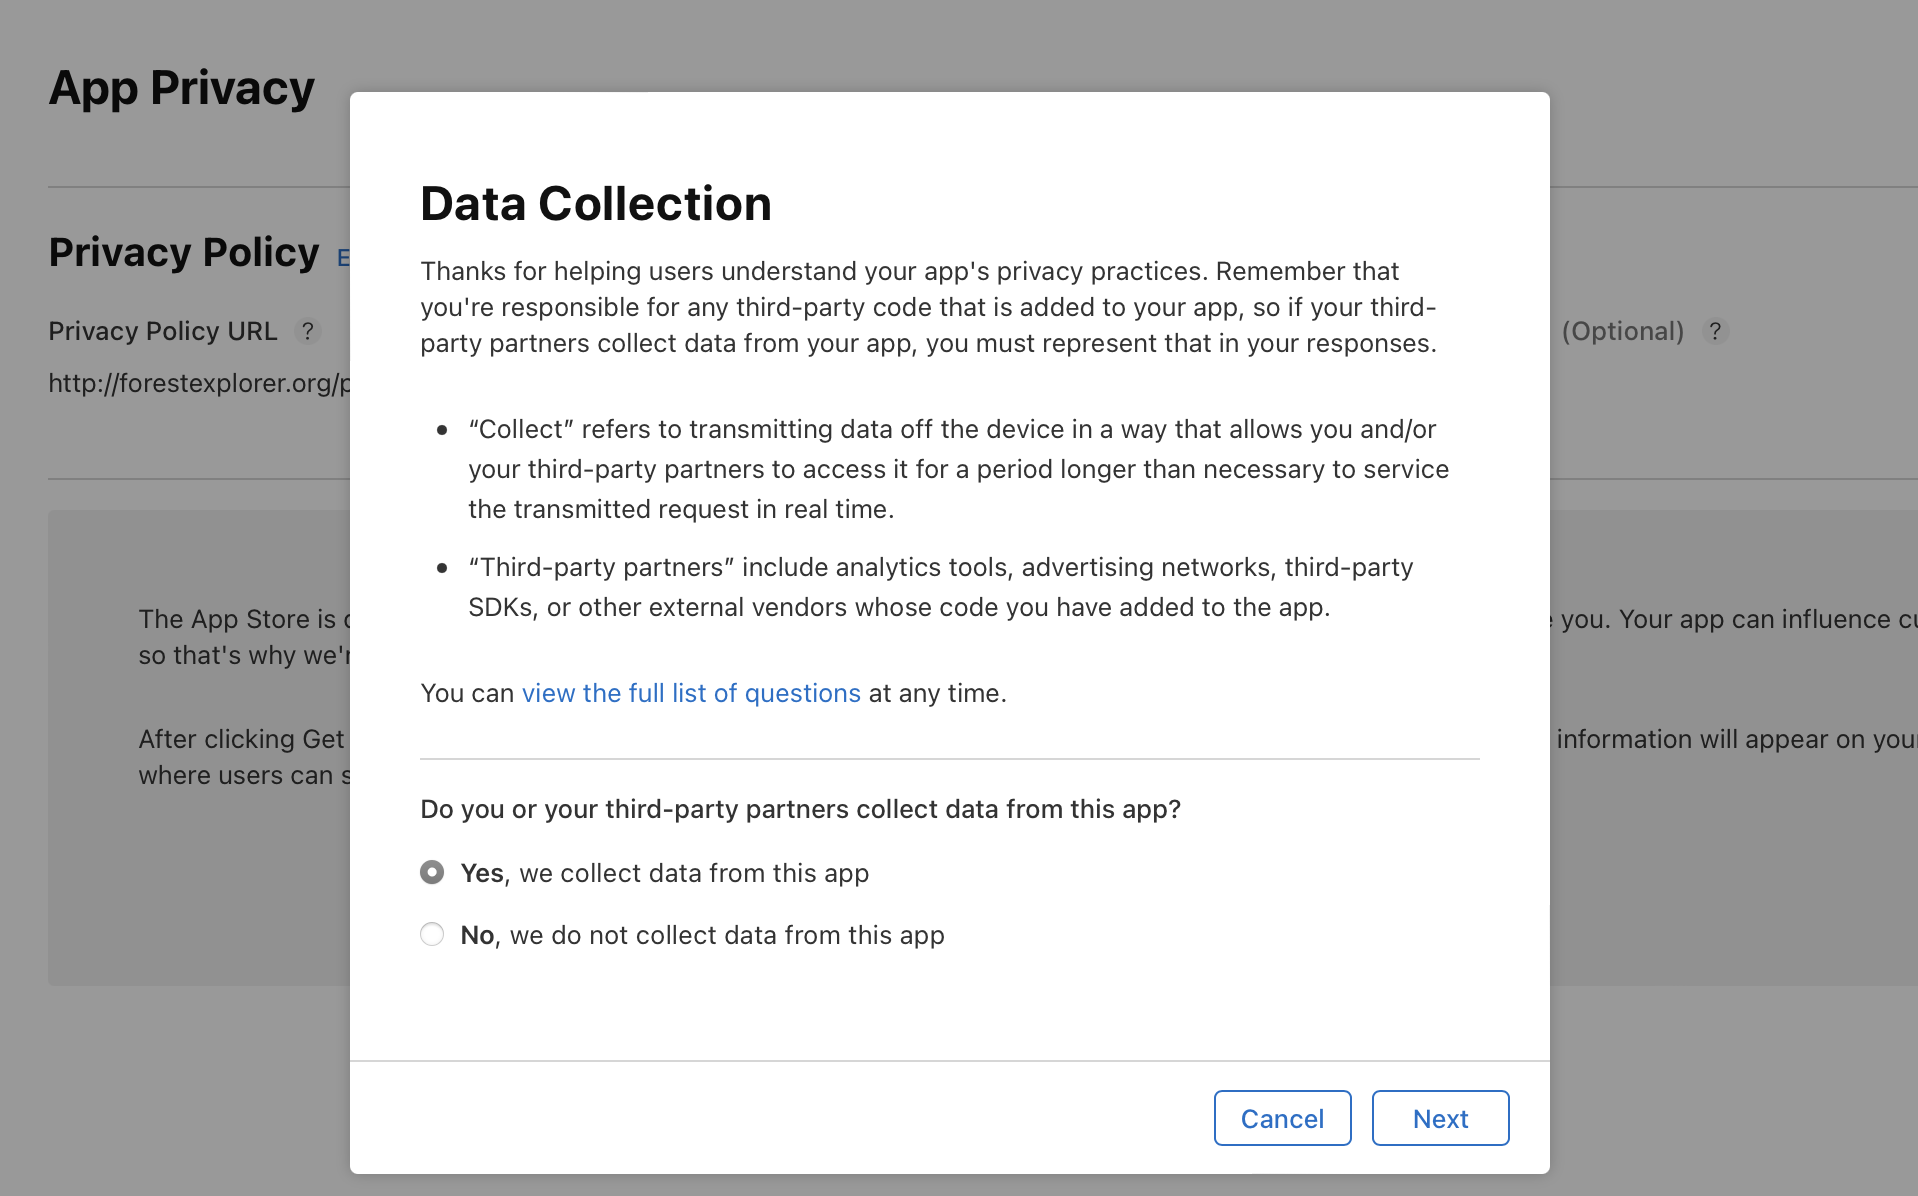 Data Collection dialog on the App Privacy page.